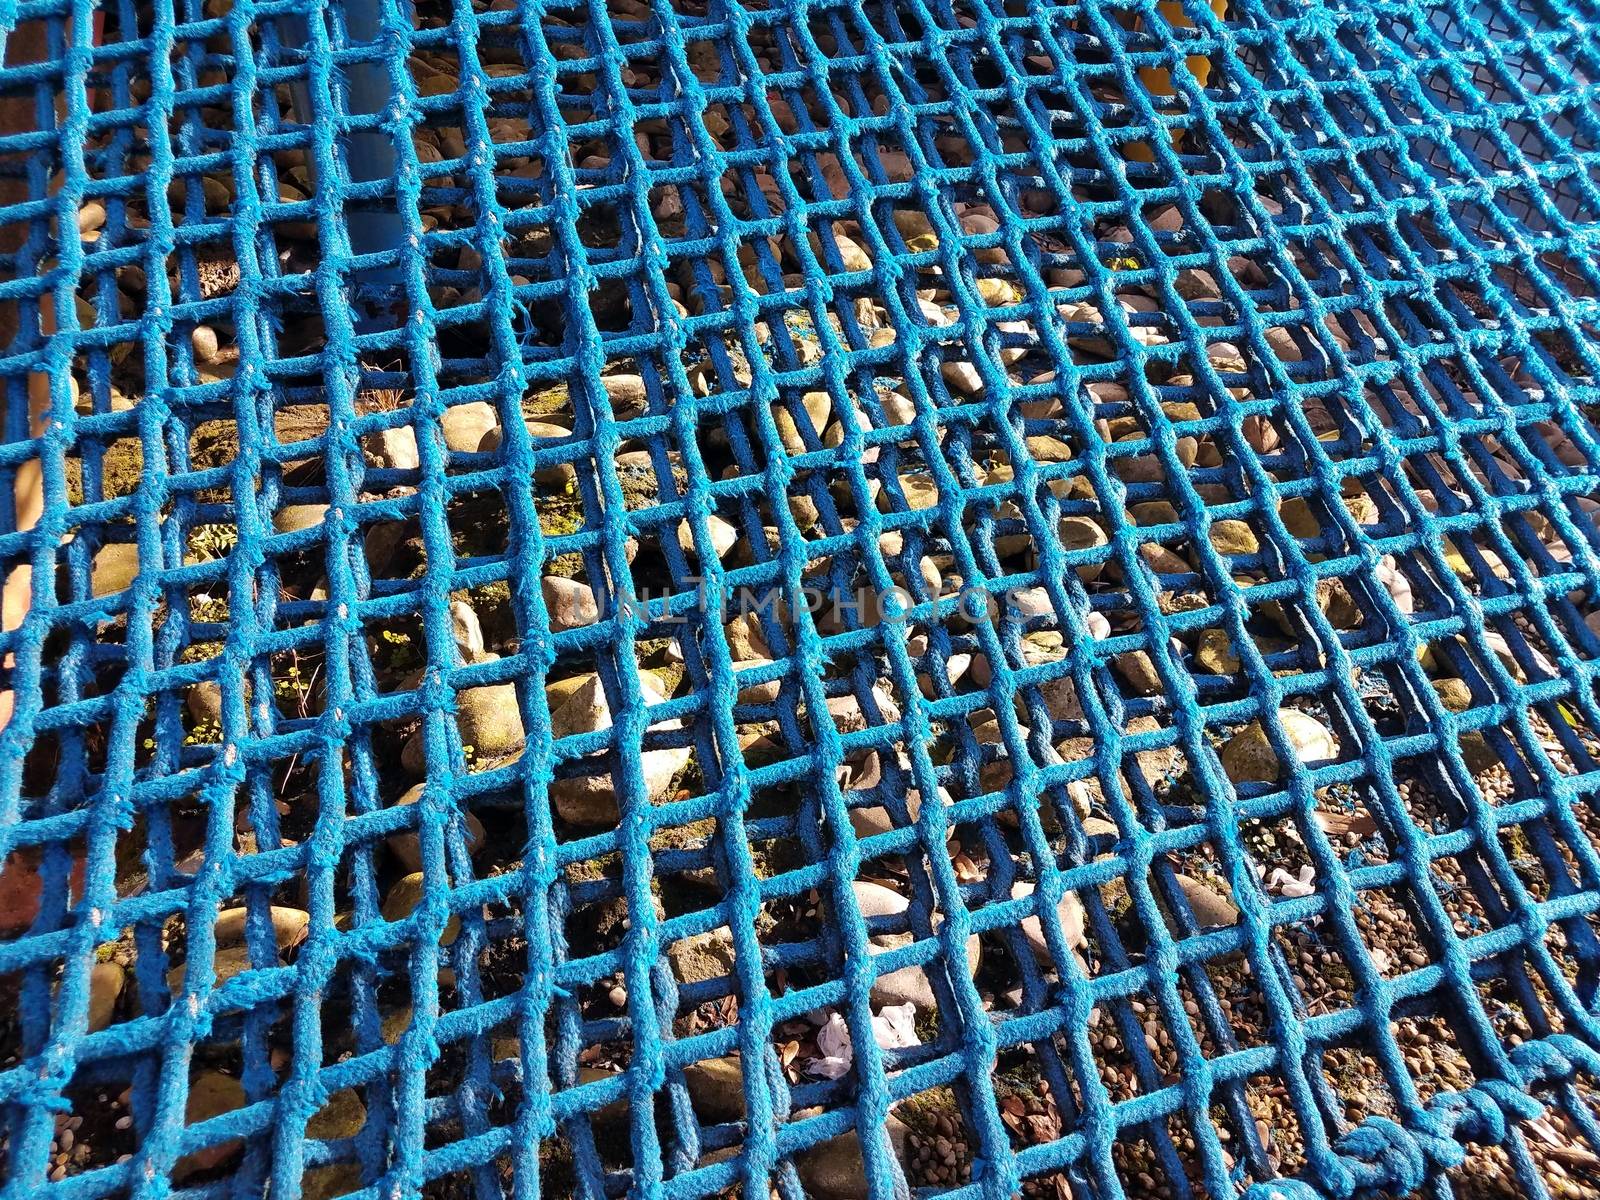 blue netting or net or rope with rocks or stones